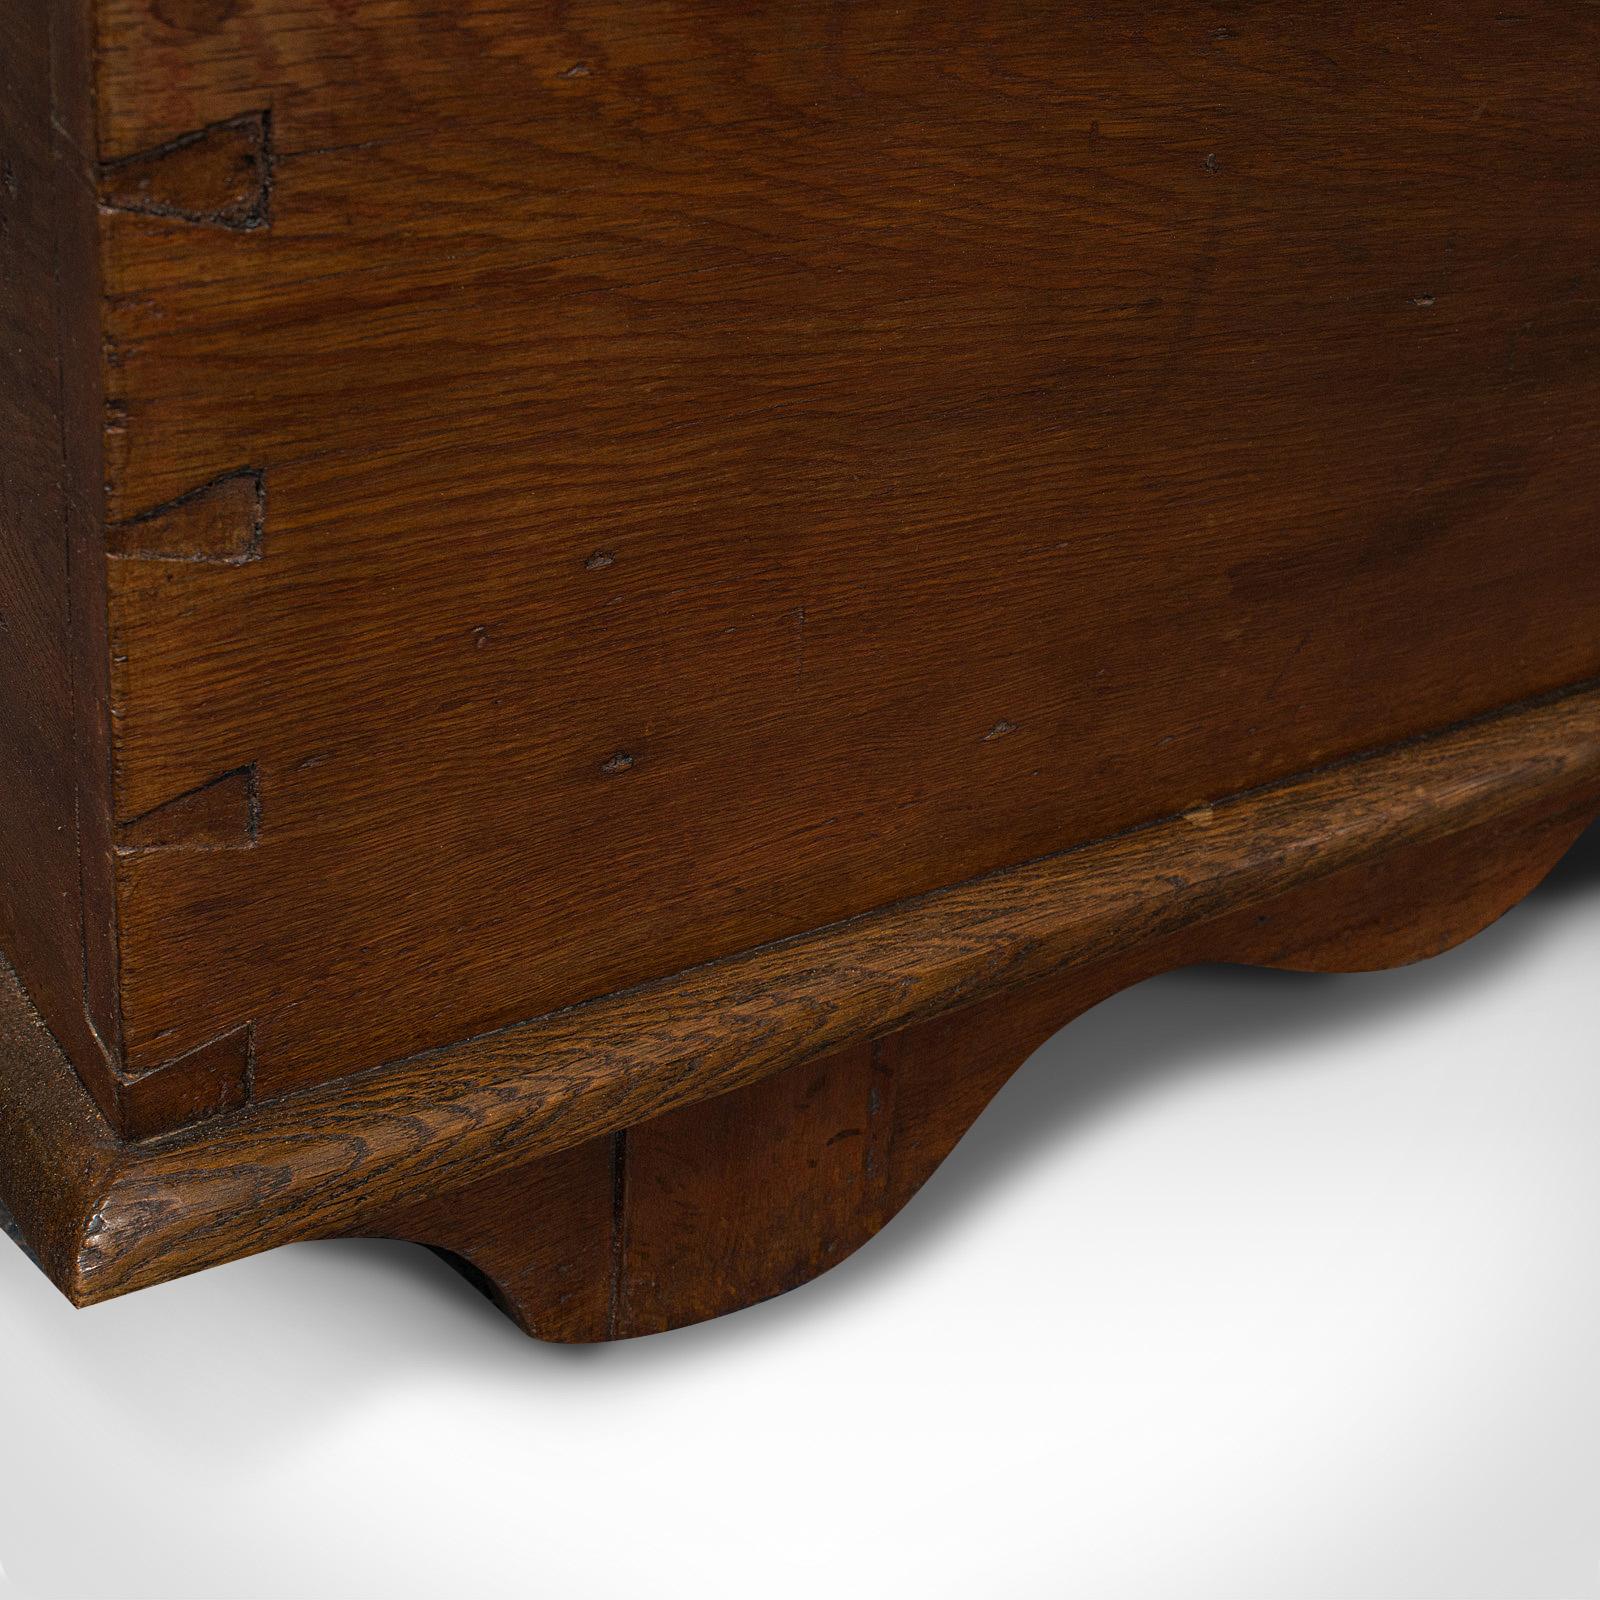 Large Antique Shipping Chest, English, Oak, Carriage Trunk, Georgian, circa 1800 For Sale 7